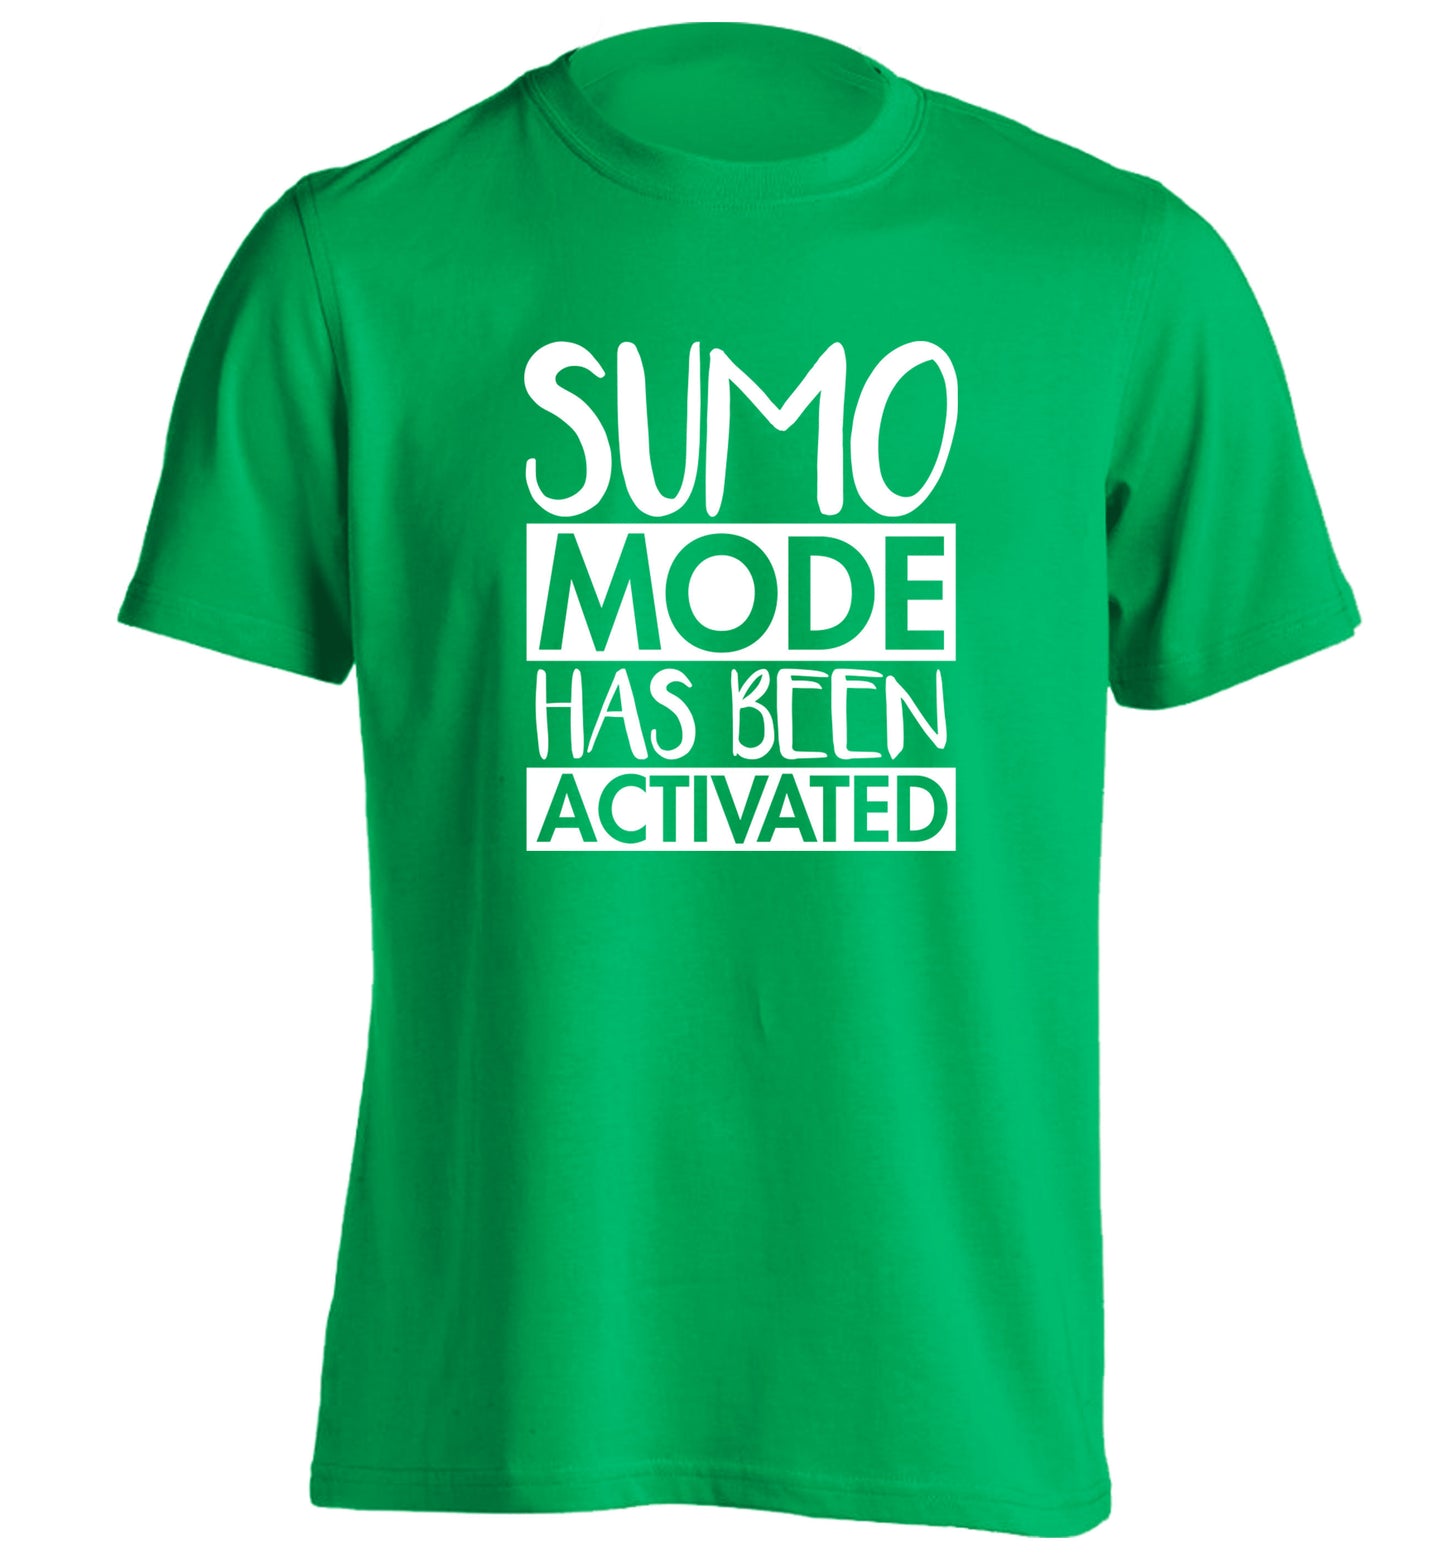 Sumo mode activated adults unisex green Tshirt 2XL